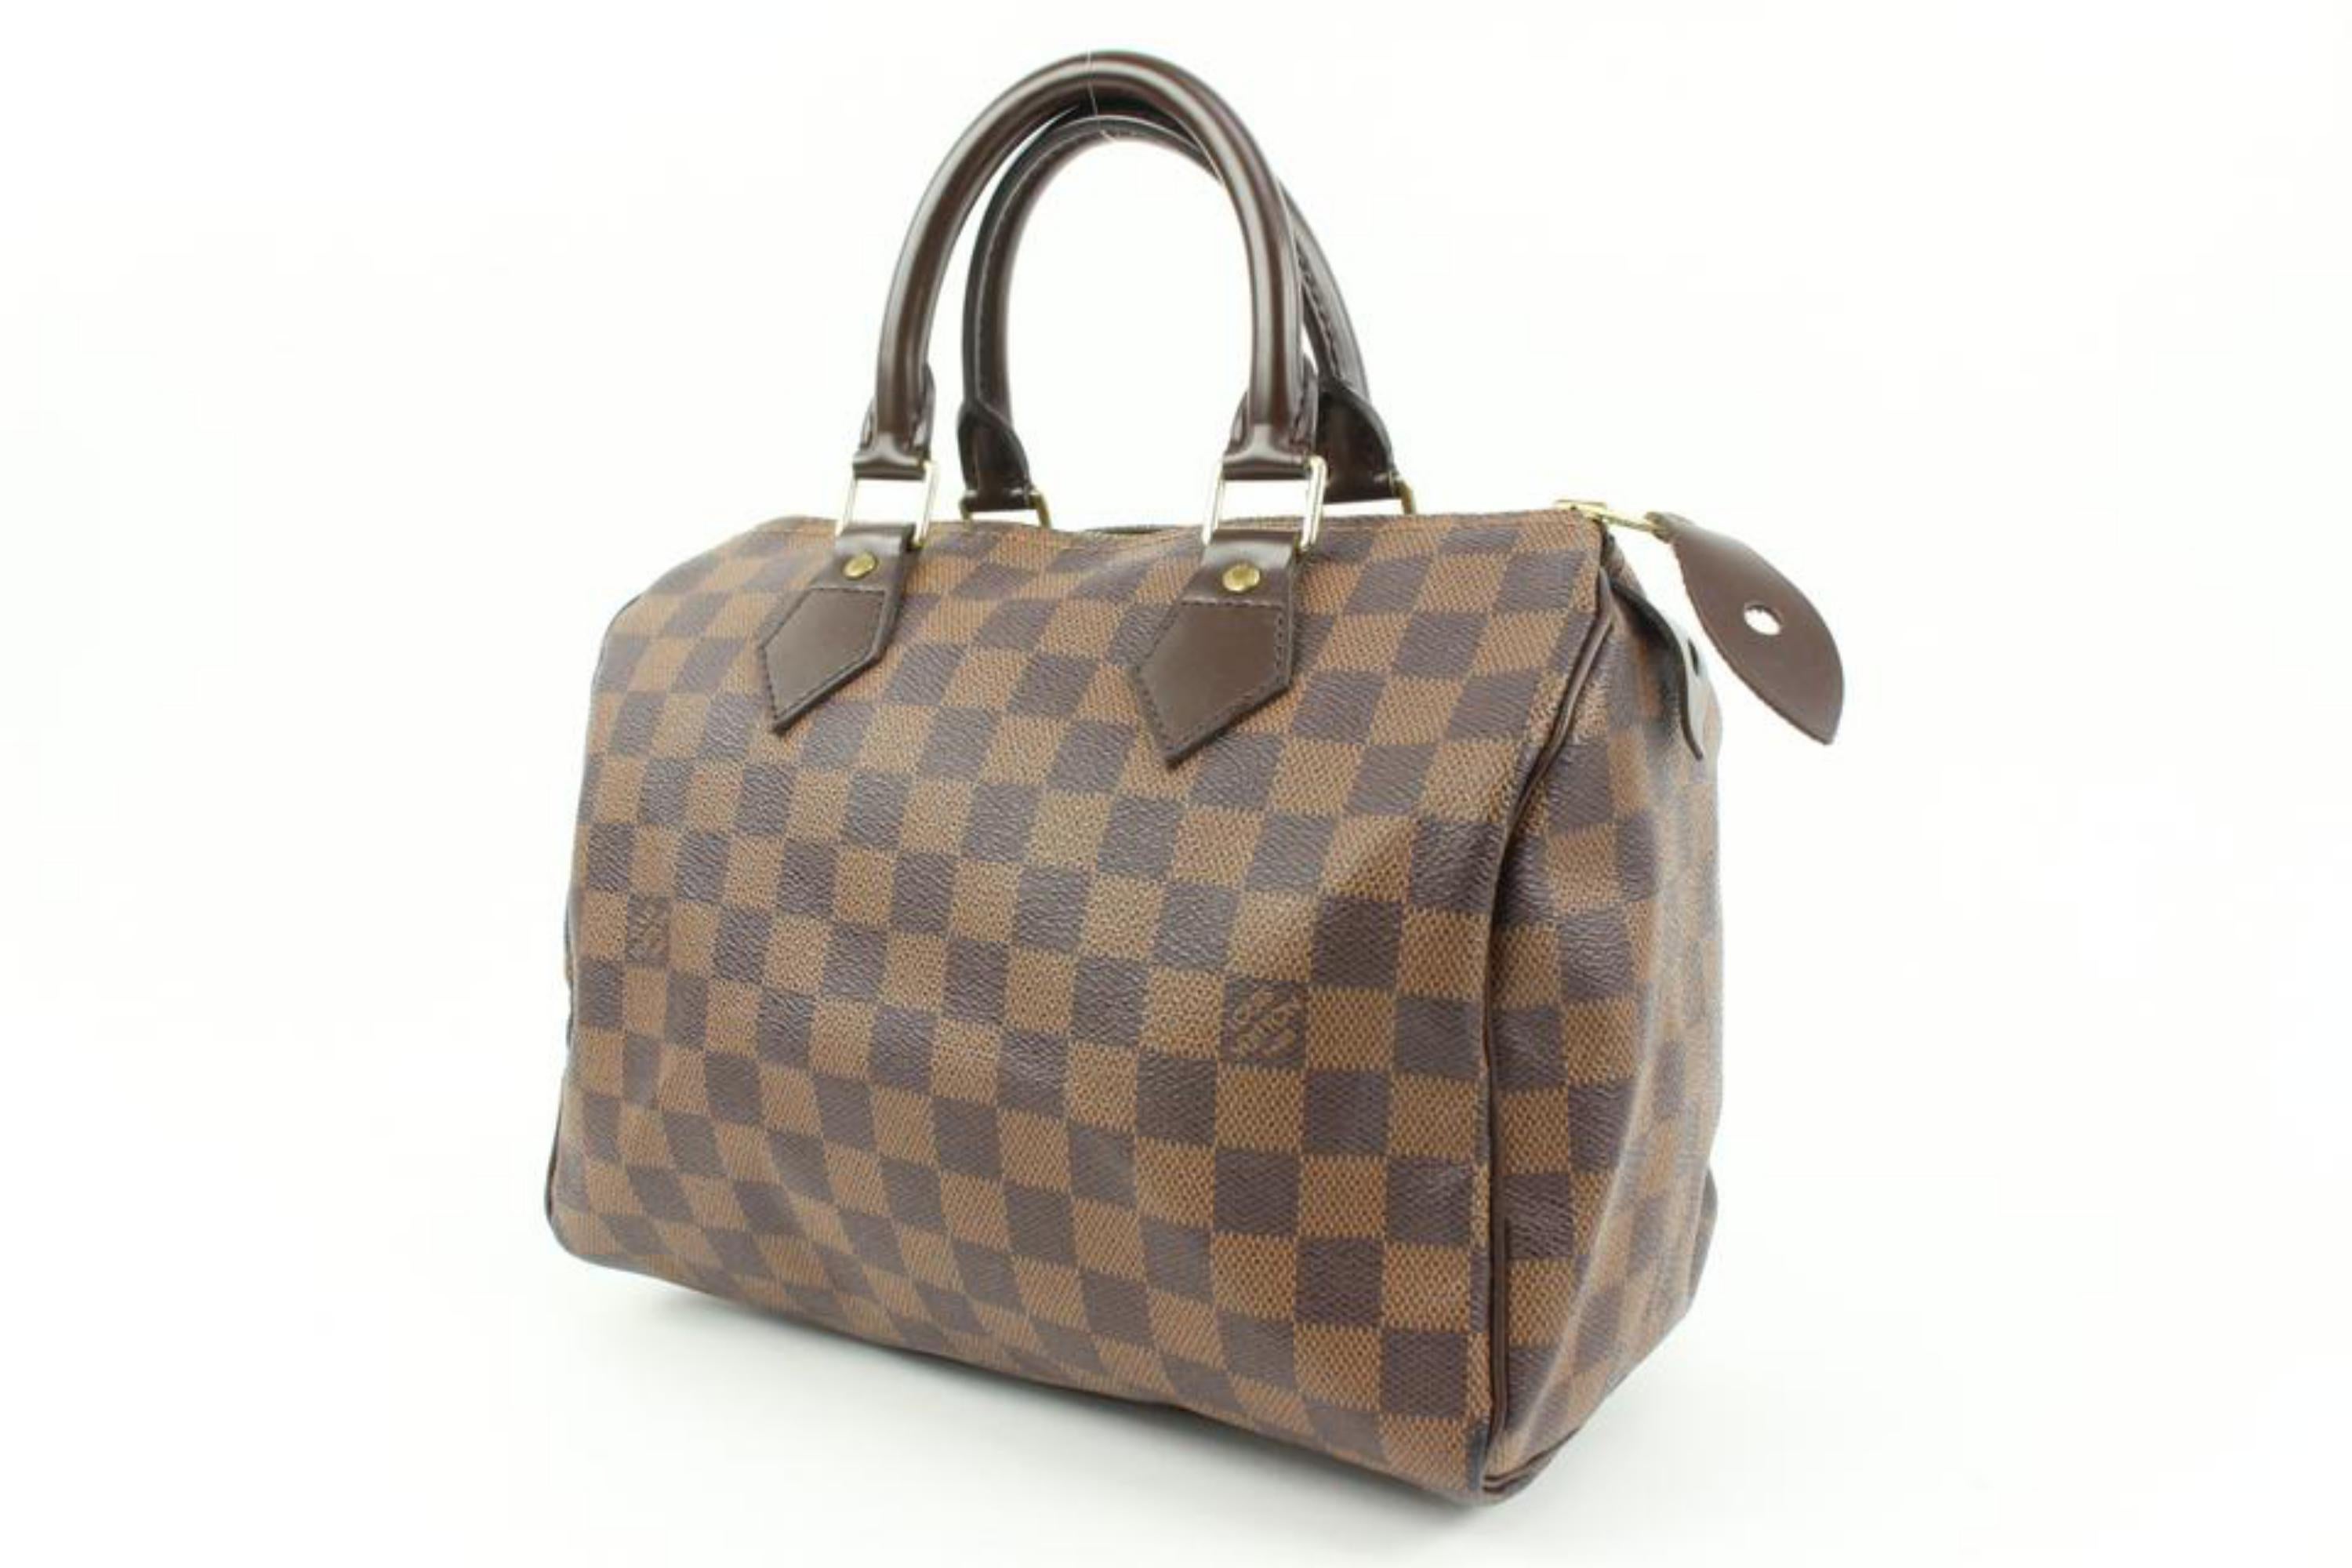 Louis Vuitton Damier Ebene Speedy 25 Boston Bag s27lv5
Date Code/Serial Number: SP0086
Made In: France
Measurements: Length:  10